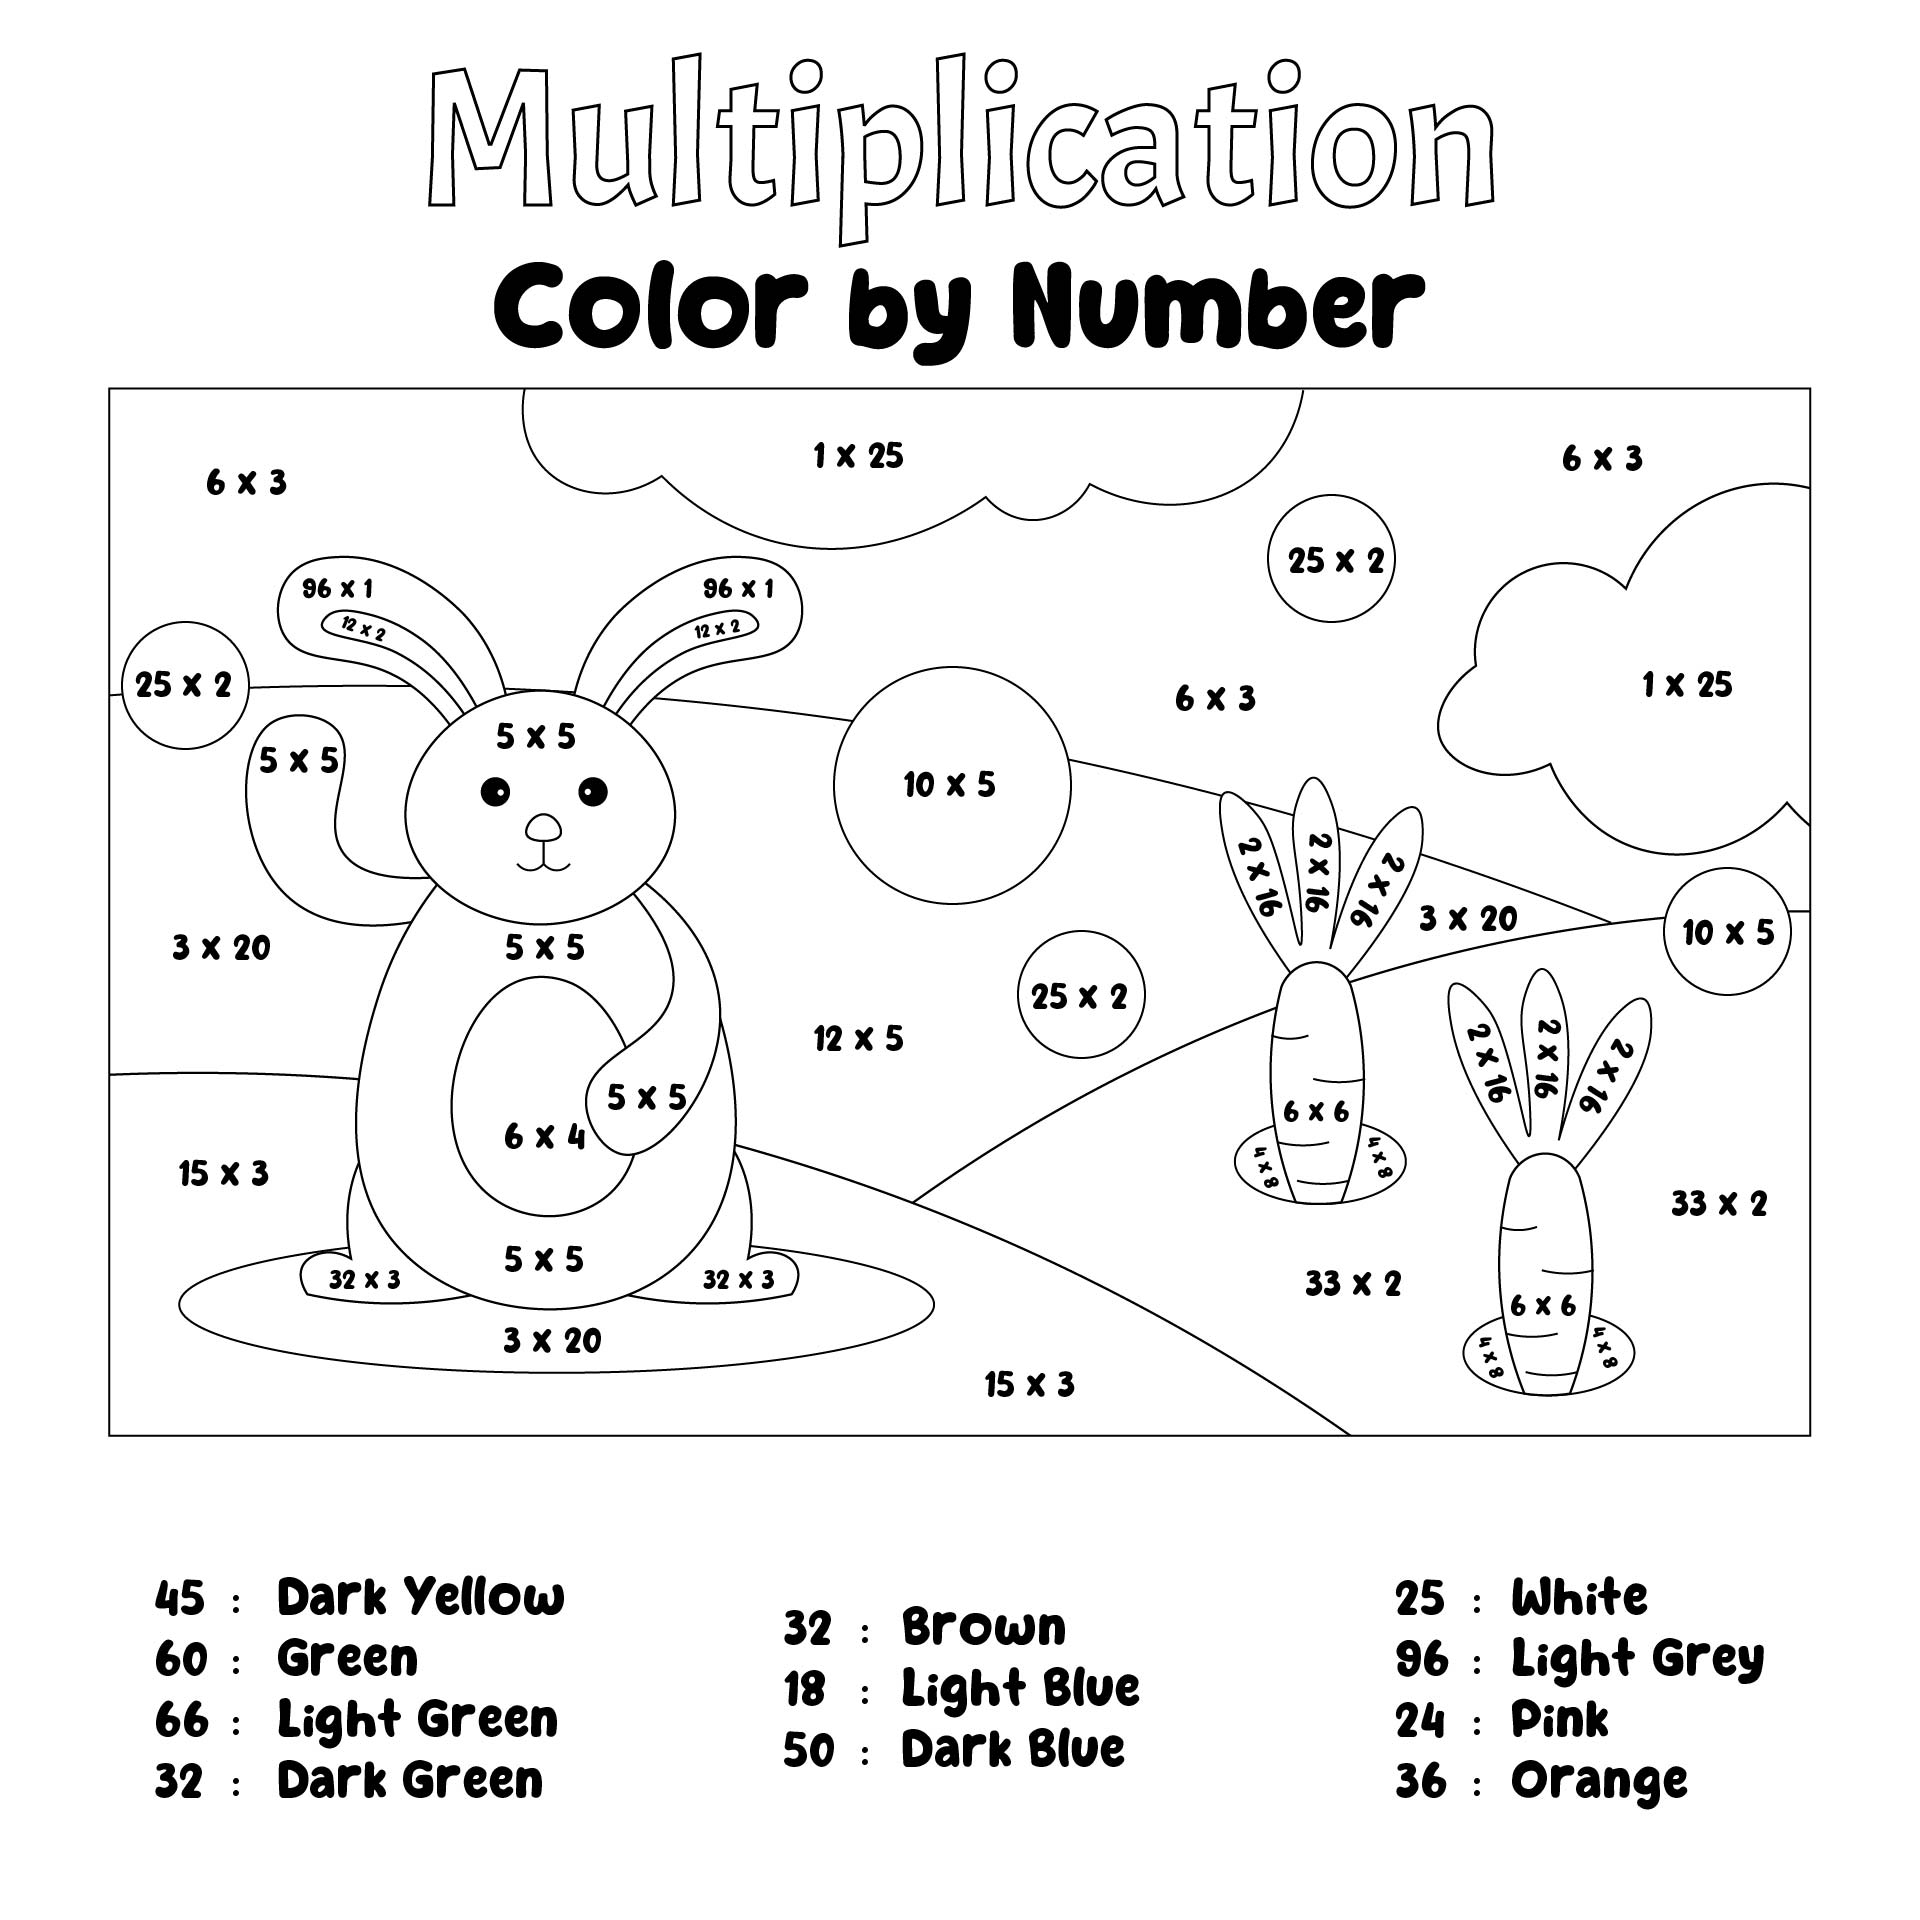 Multiplication Color by Number Pages